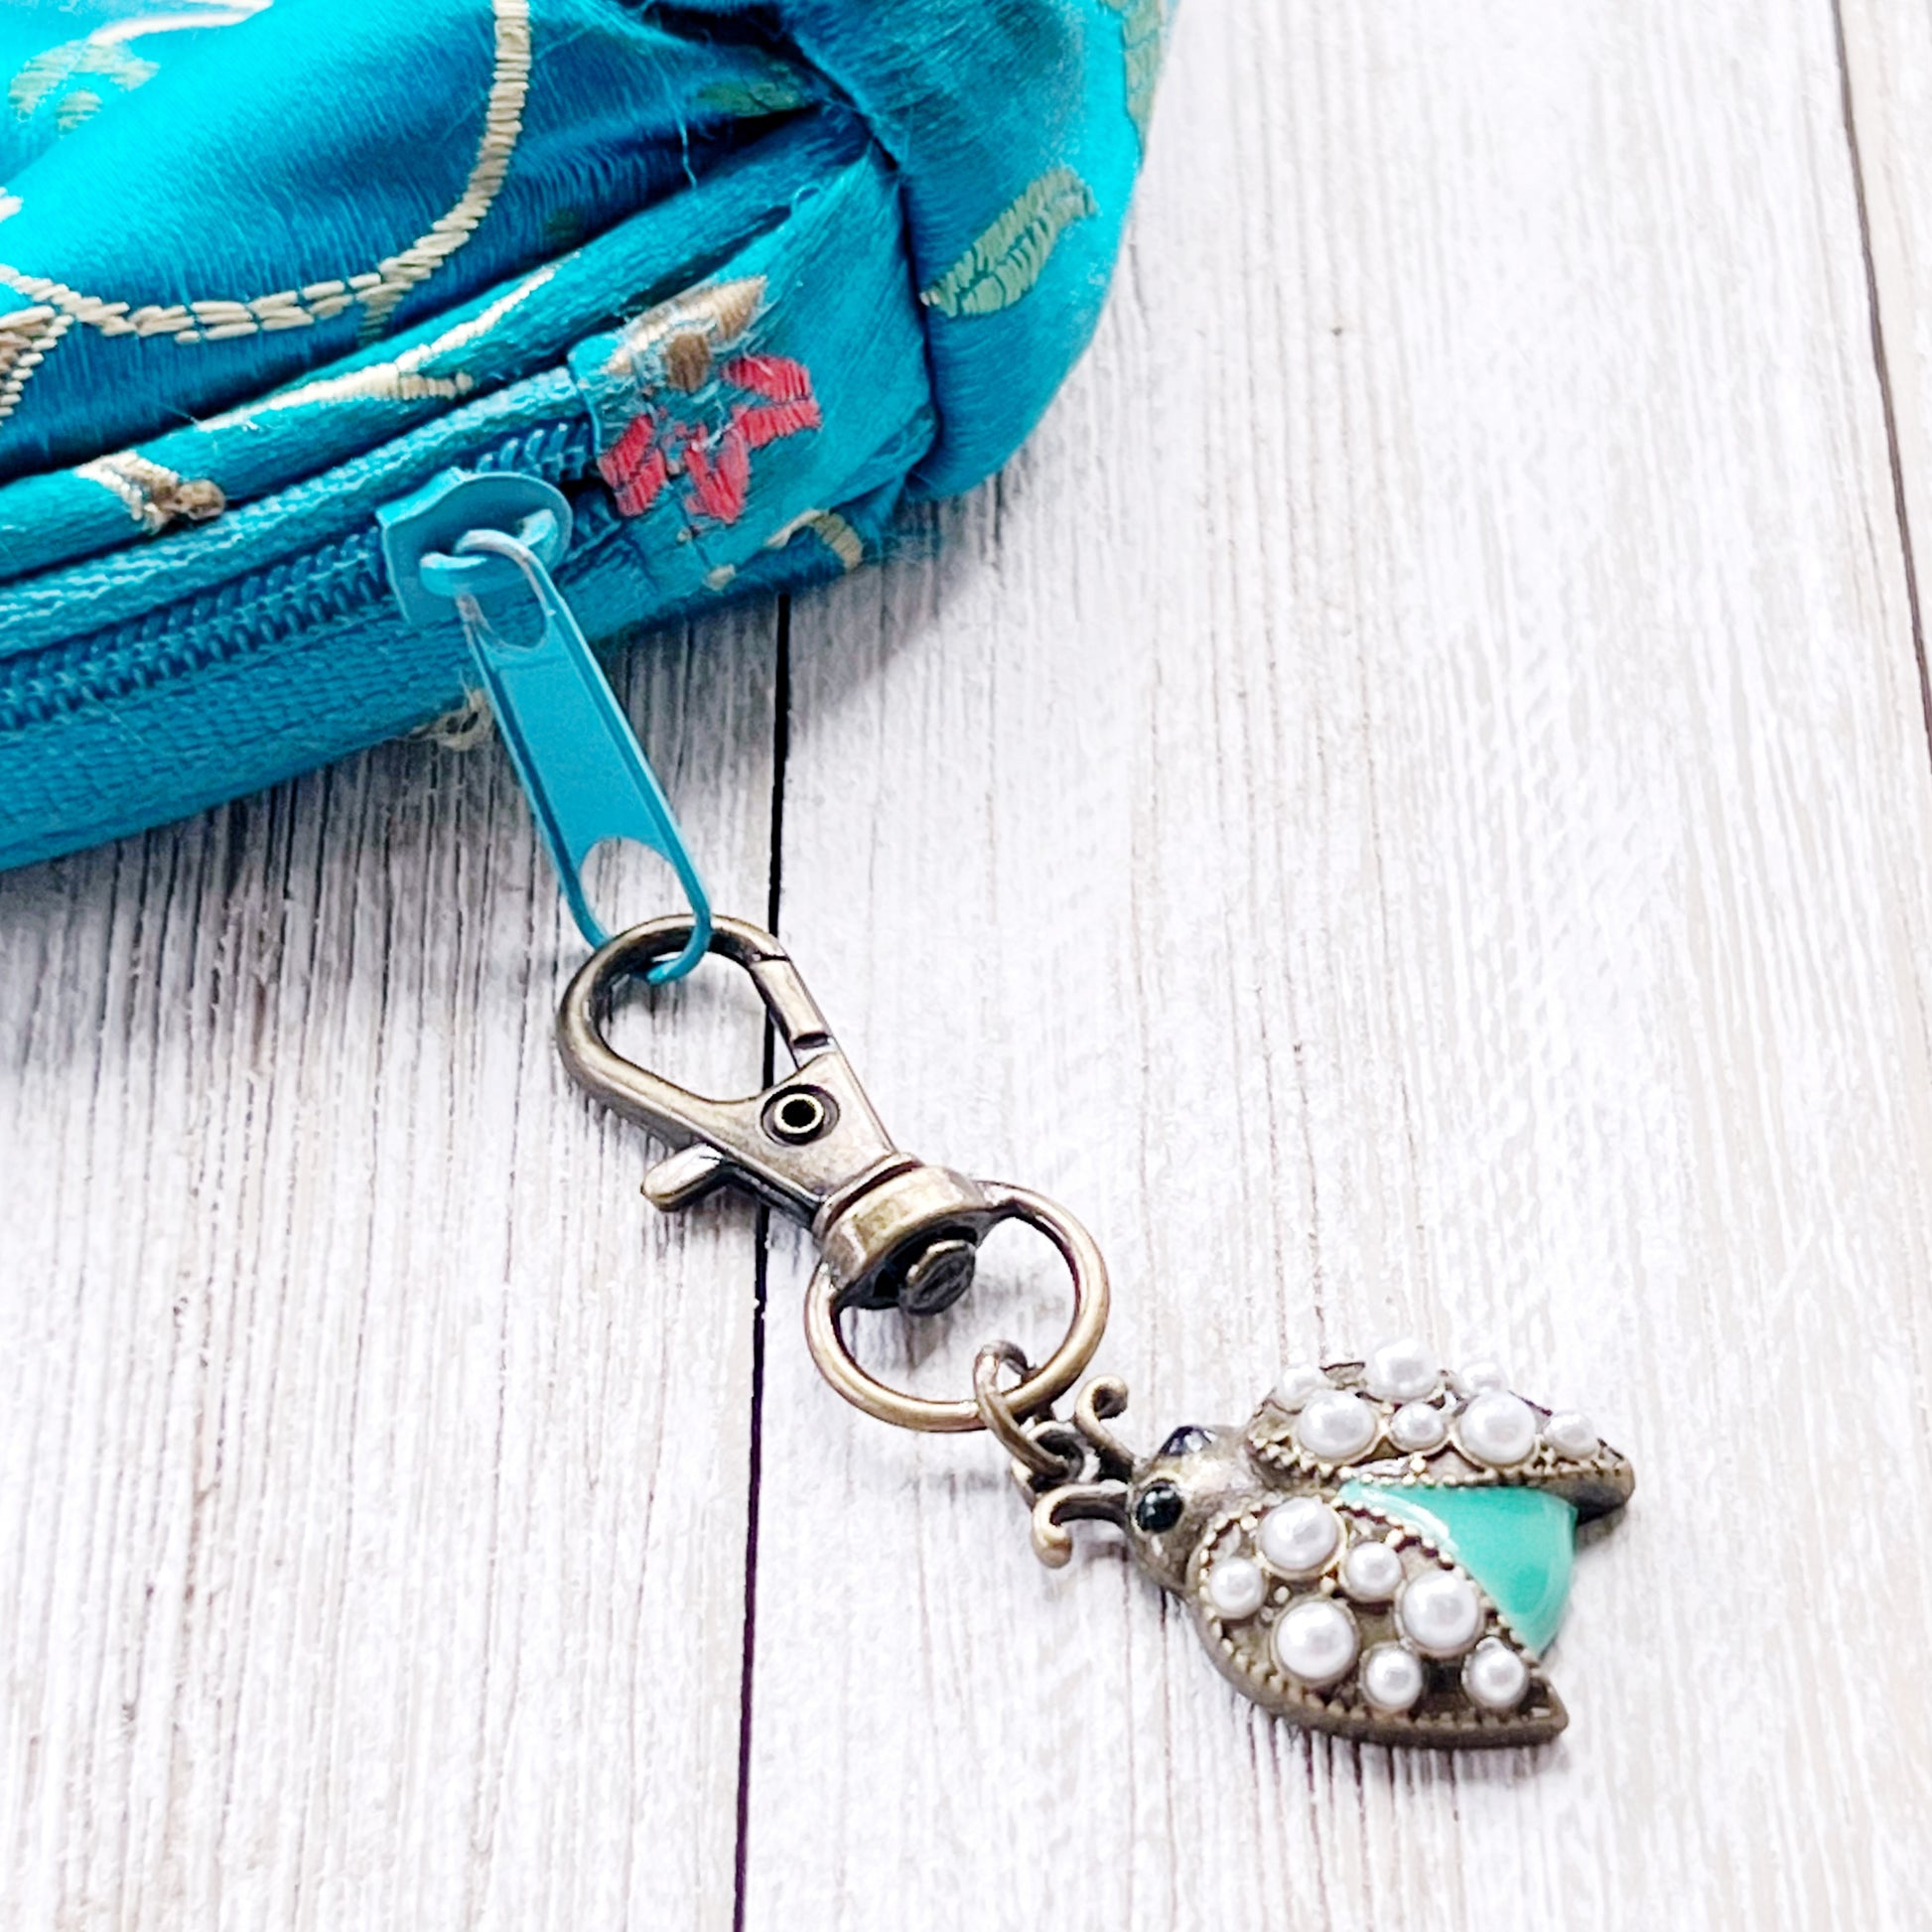 Butterfly & Ladybug Zipper Pull Keychain Charm with Rhinestones - Stylish and Whimsical Accessory for Your Bag